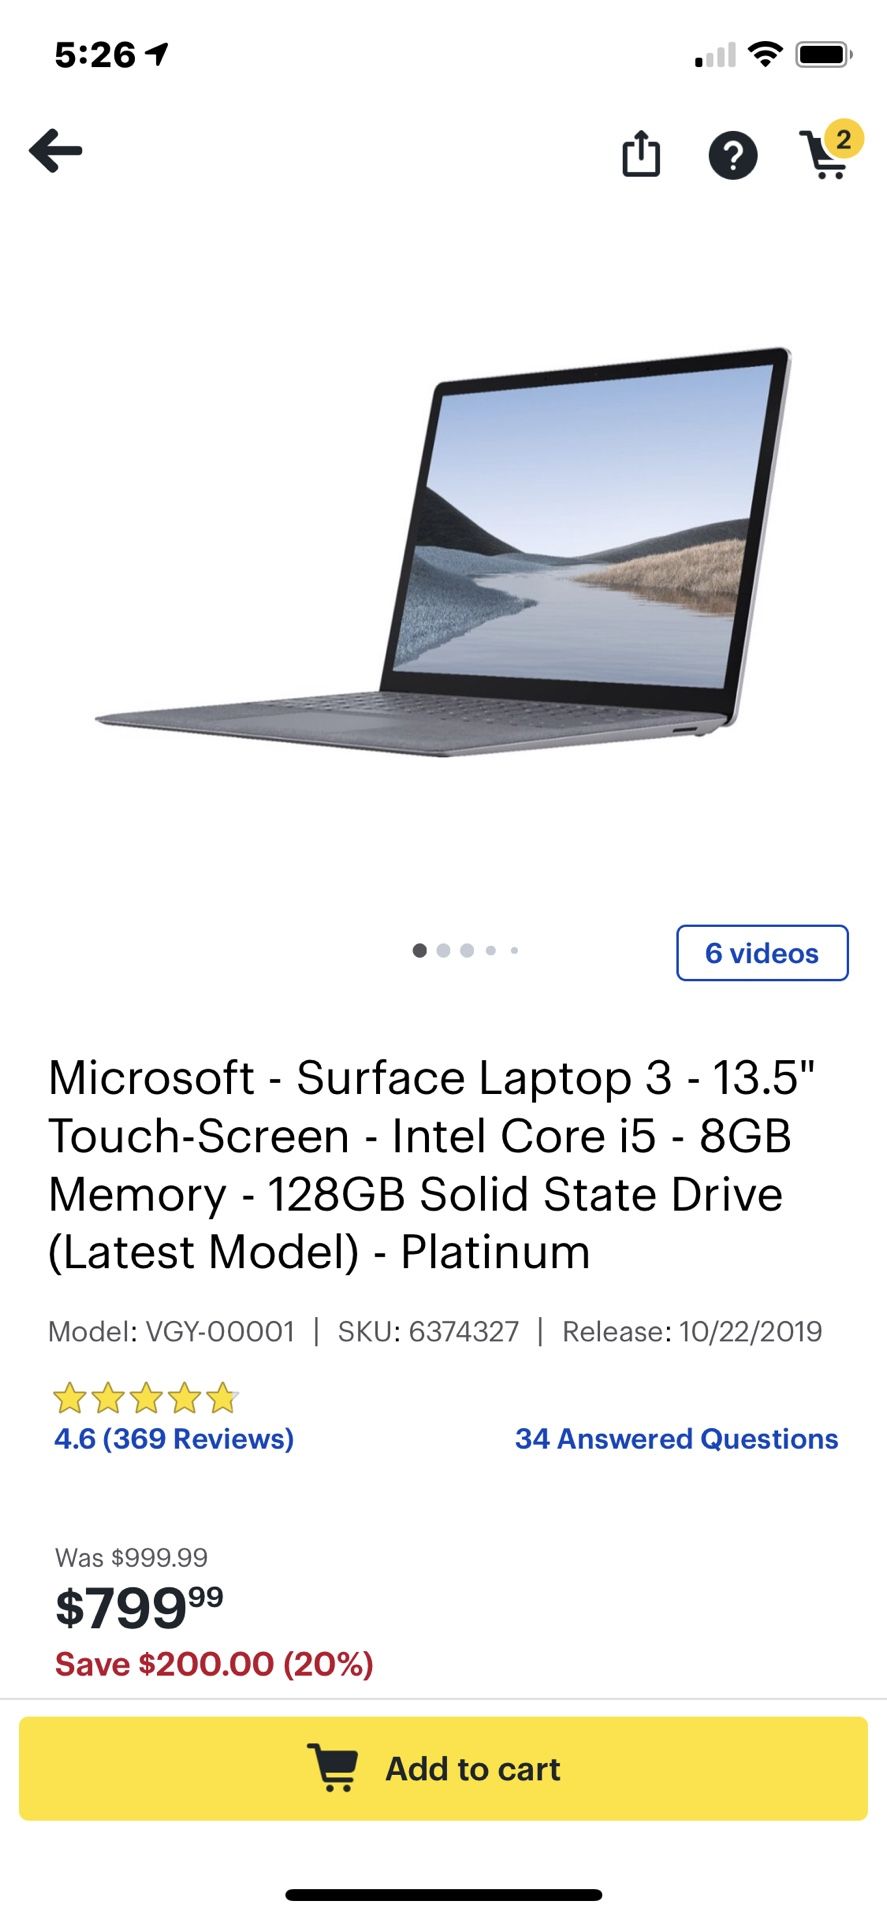 Microsoft- surface laptop 3 - 13.5” touchscreen new unopened